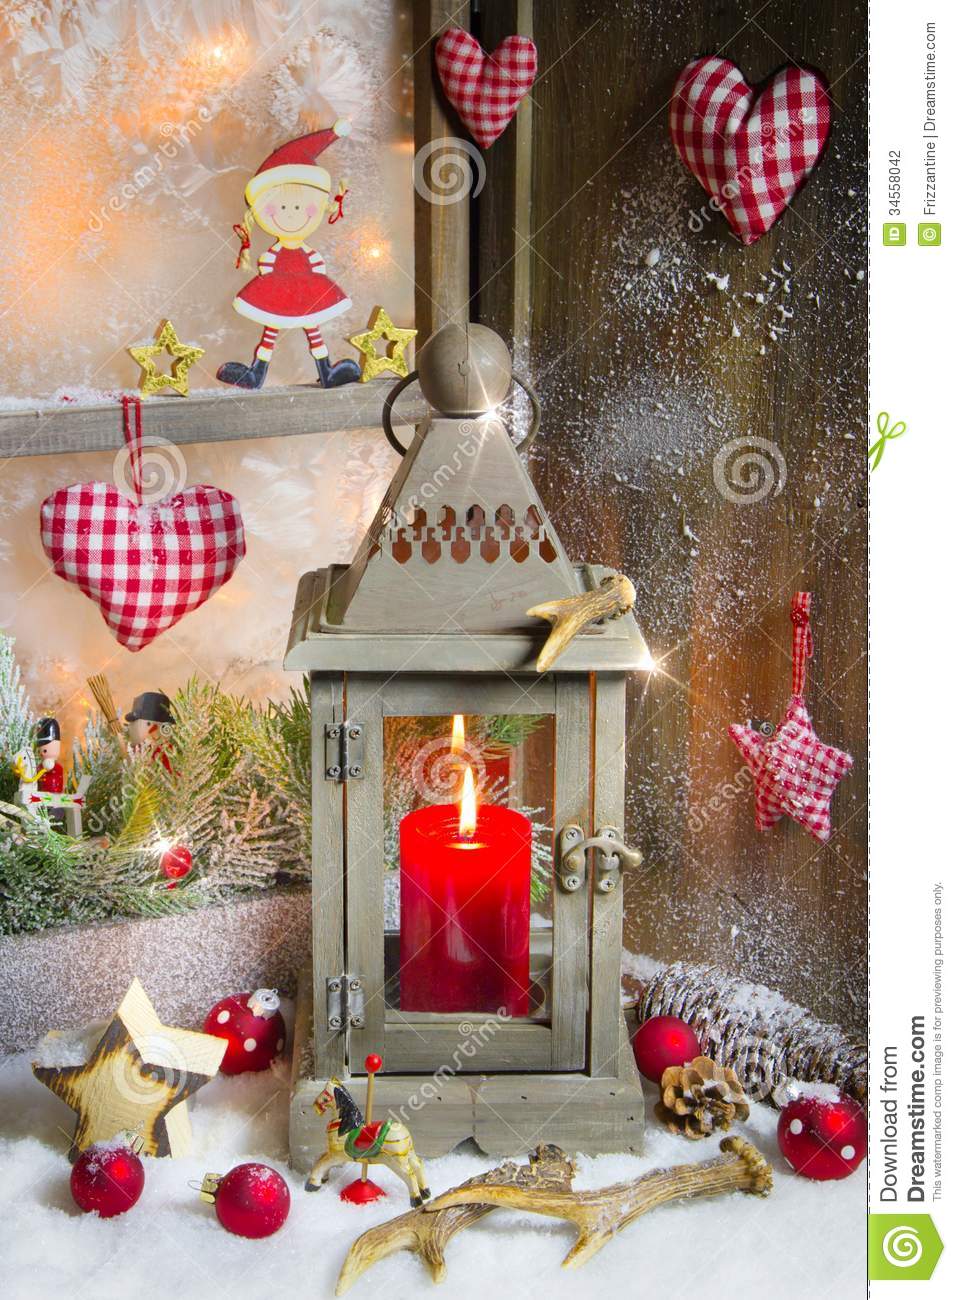 Rustic Lantern With Candlelights For Christmas   Classic In Red Stock